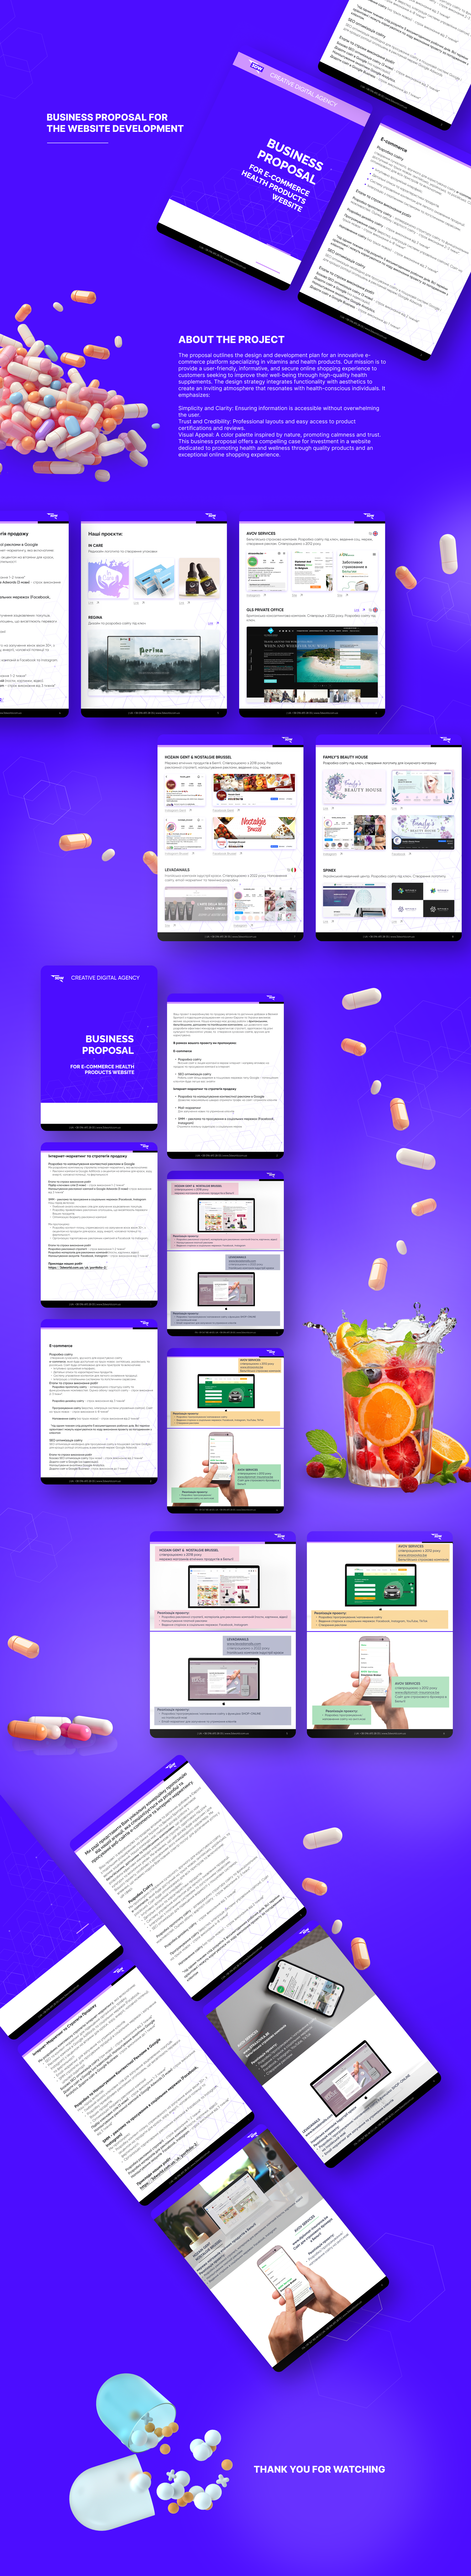 Business Proposal for E-Commerce Health Products Website